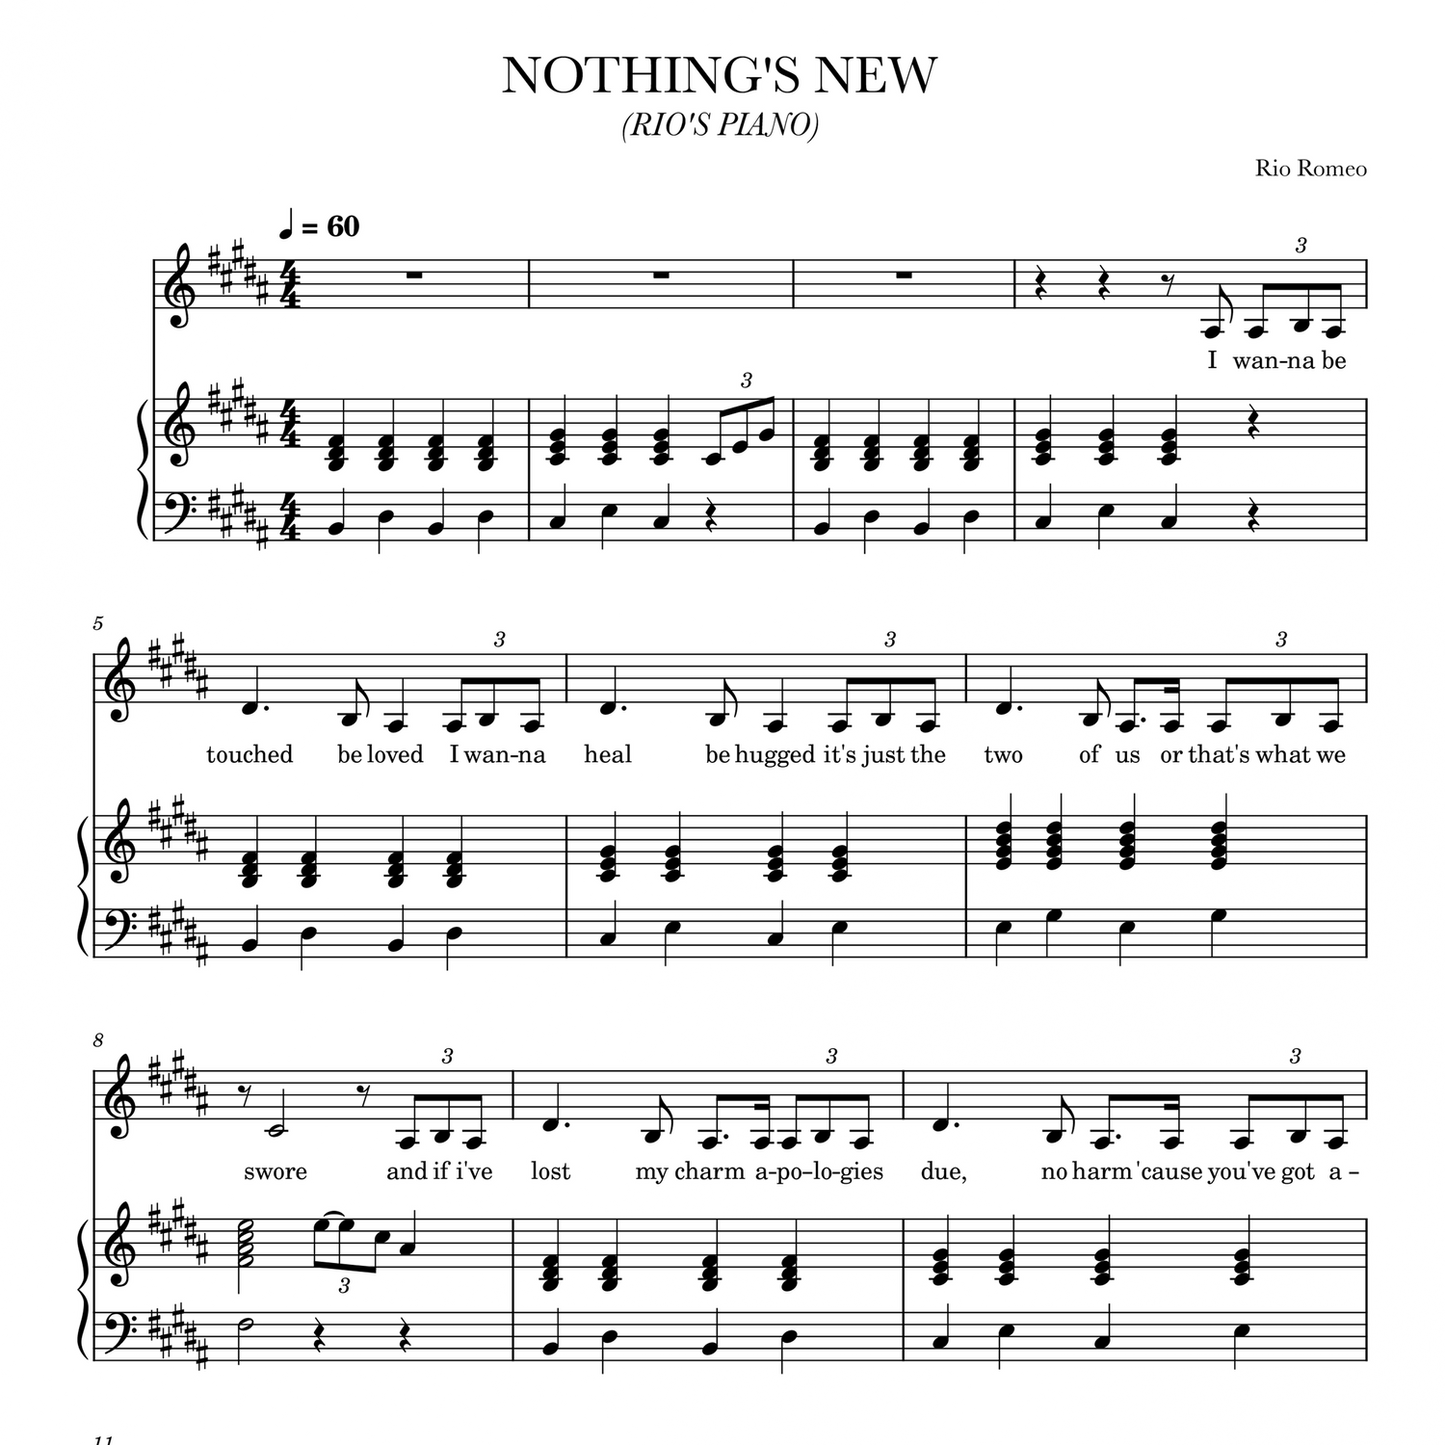 NOTHING'S NEW SHEET MUSIC